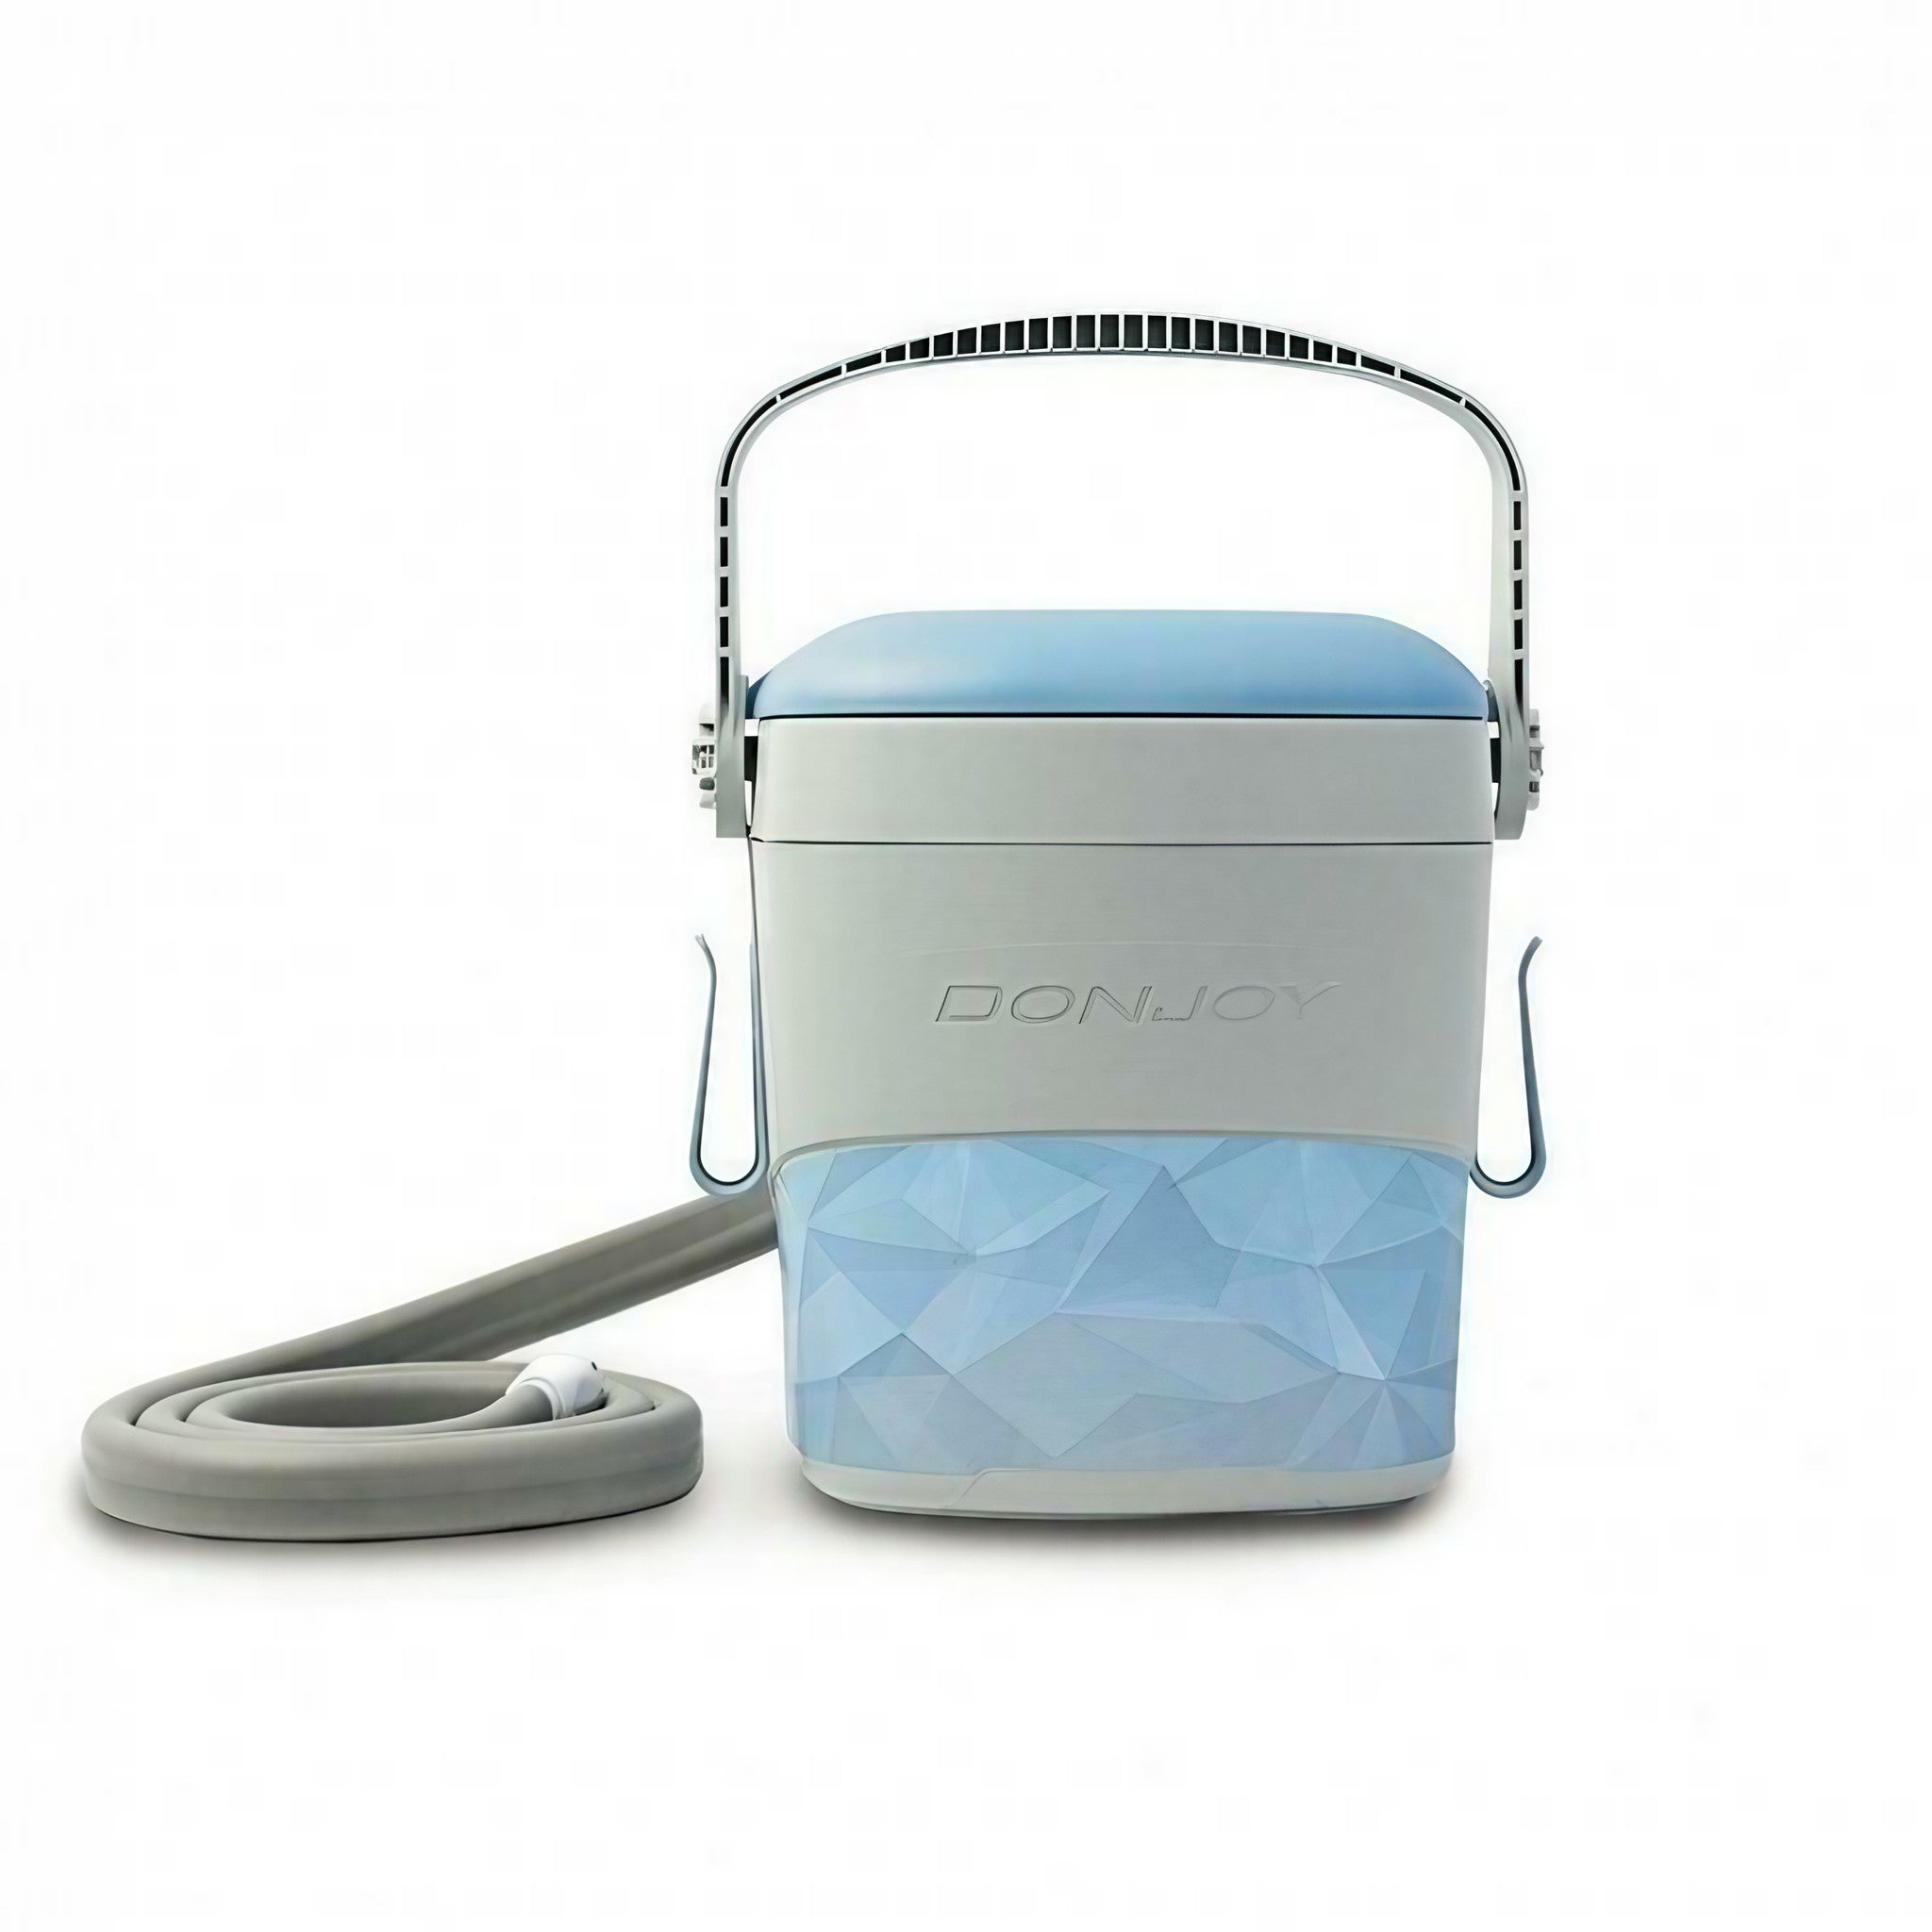 DonJoy - Donjoy Iceman Classic3 Cold Therapy Unit - SourceColdTherapy